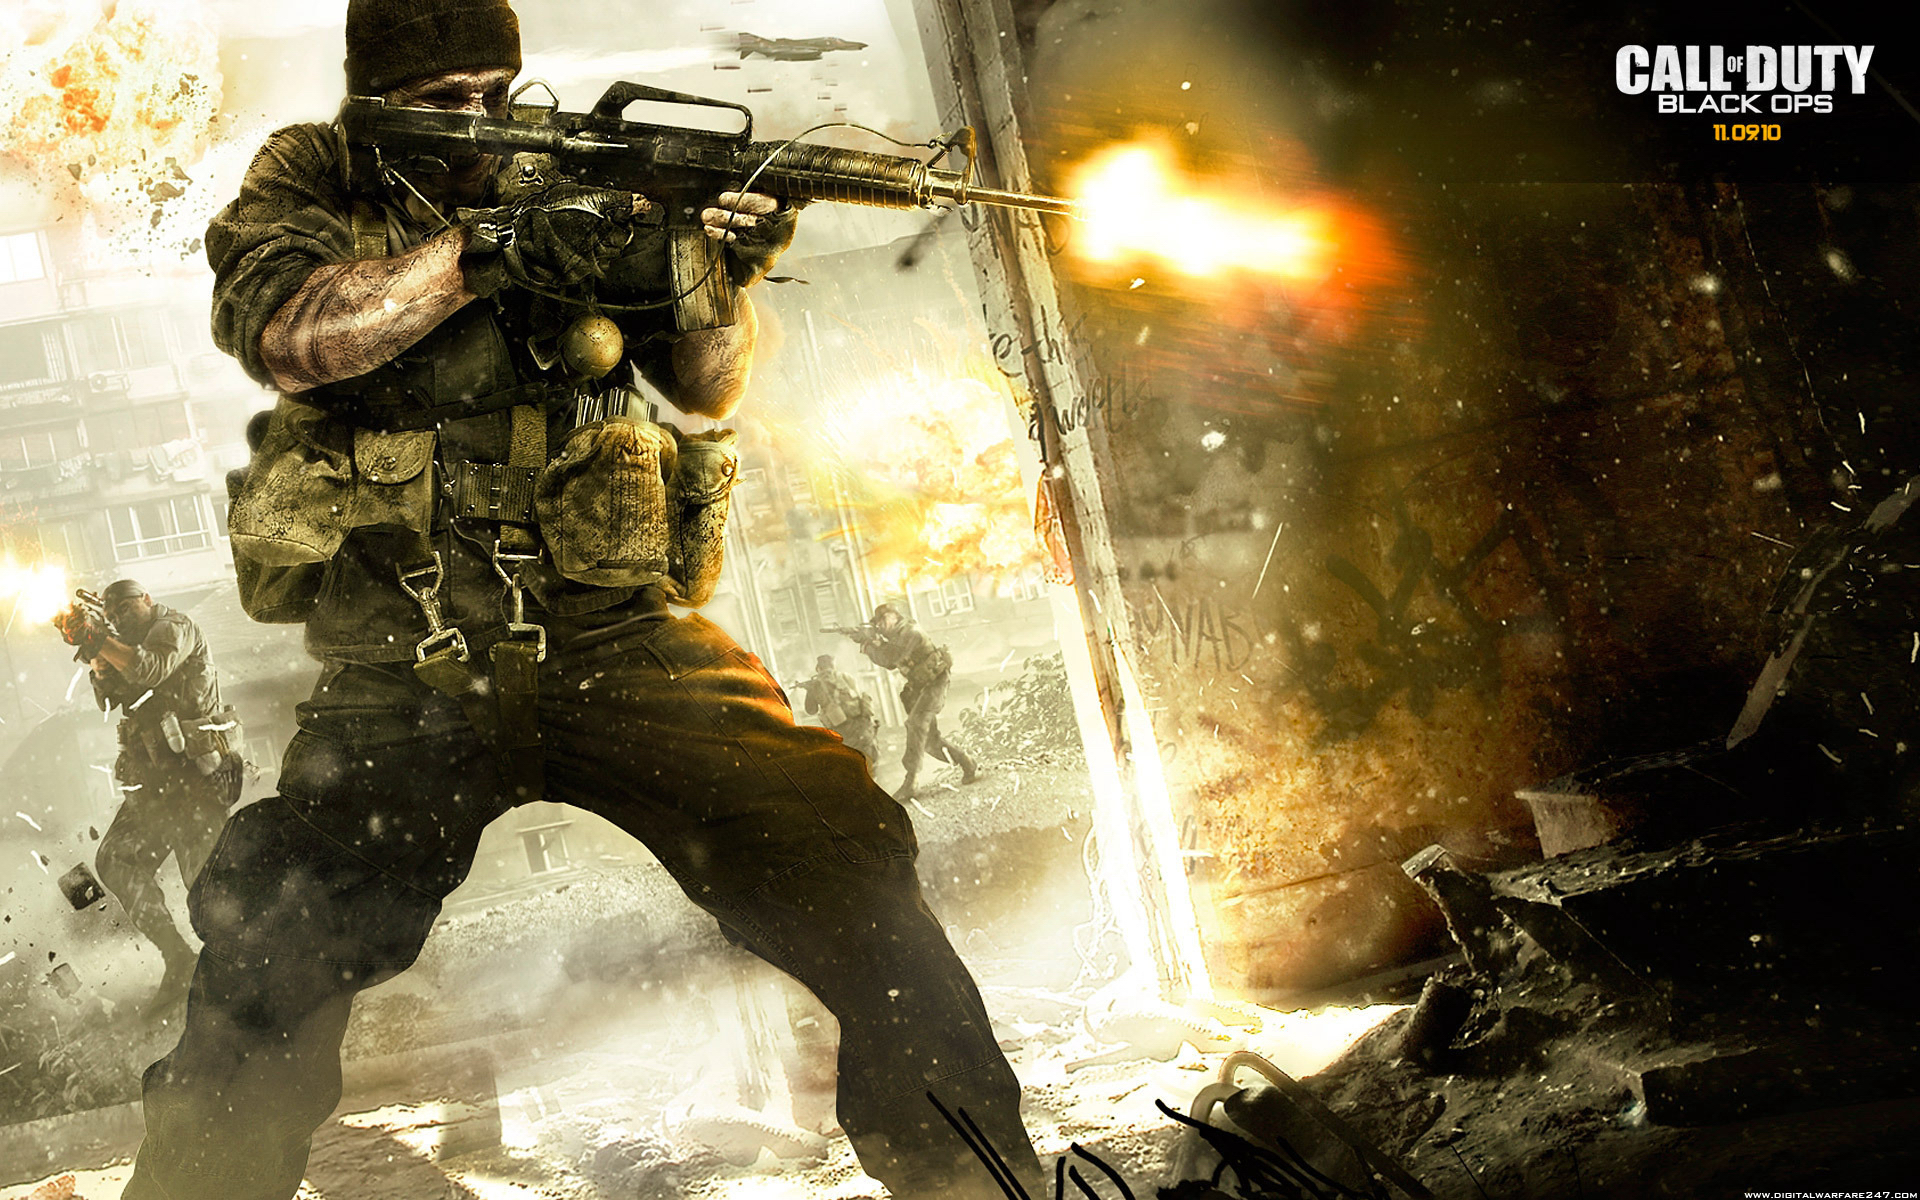 Video Game Call of Duty: Black Ops HD Wallpaper | Background Image